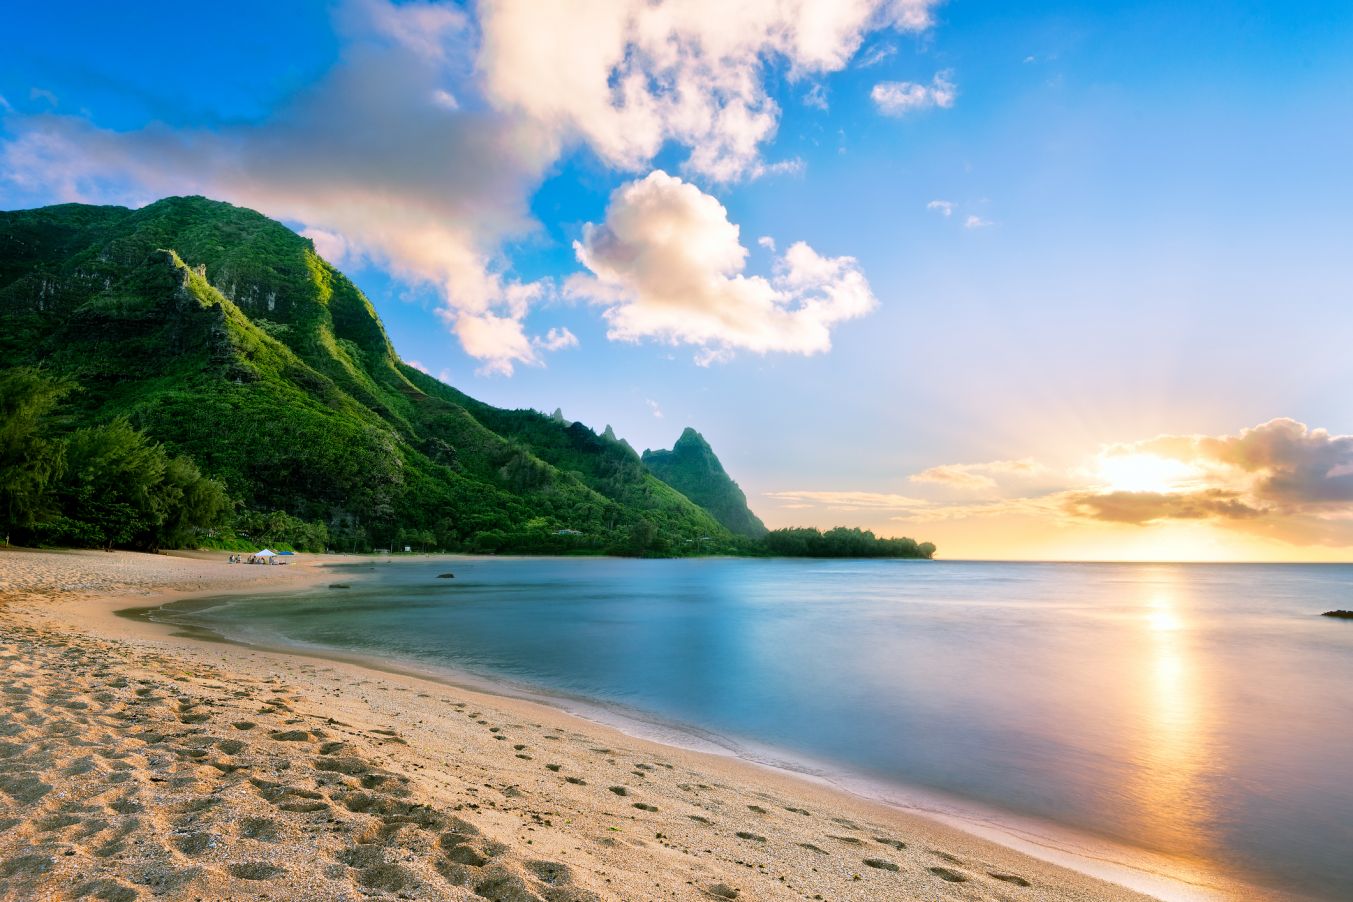 HAWAII: HOW TO HAVE THE PERFECT HAWAI’I VACATION AT HOME